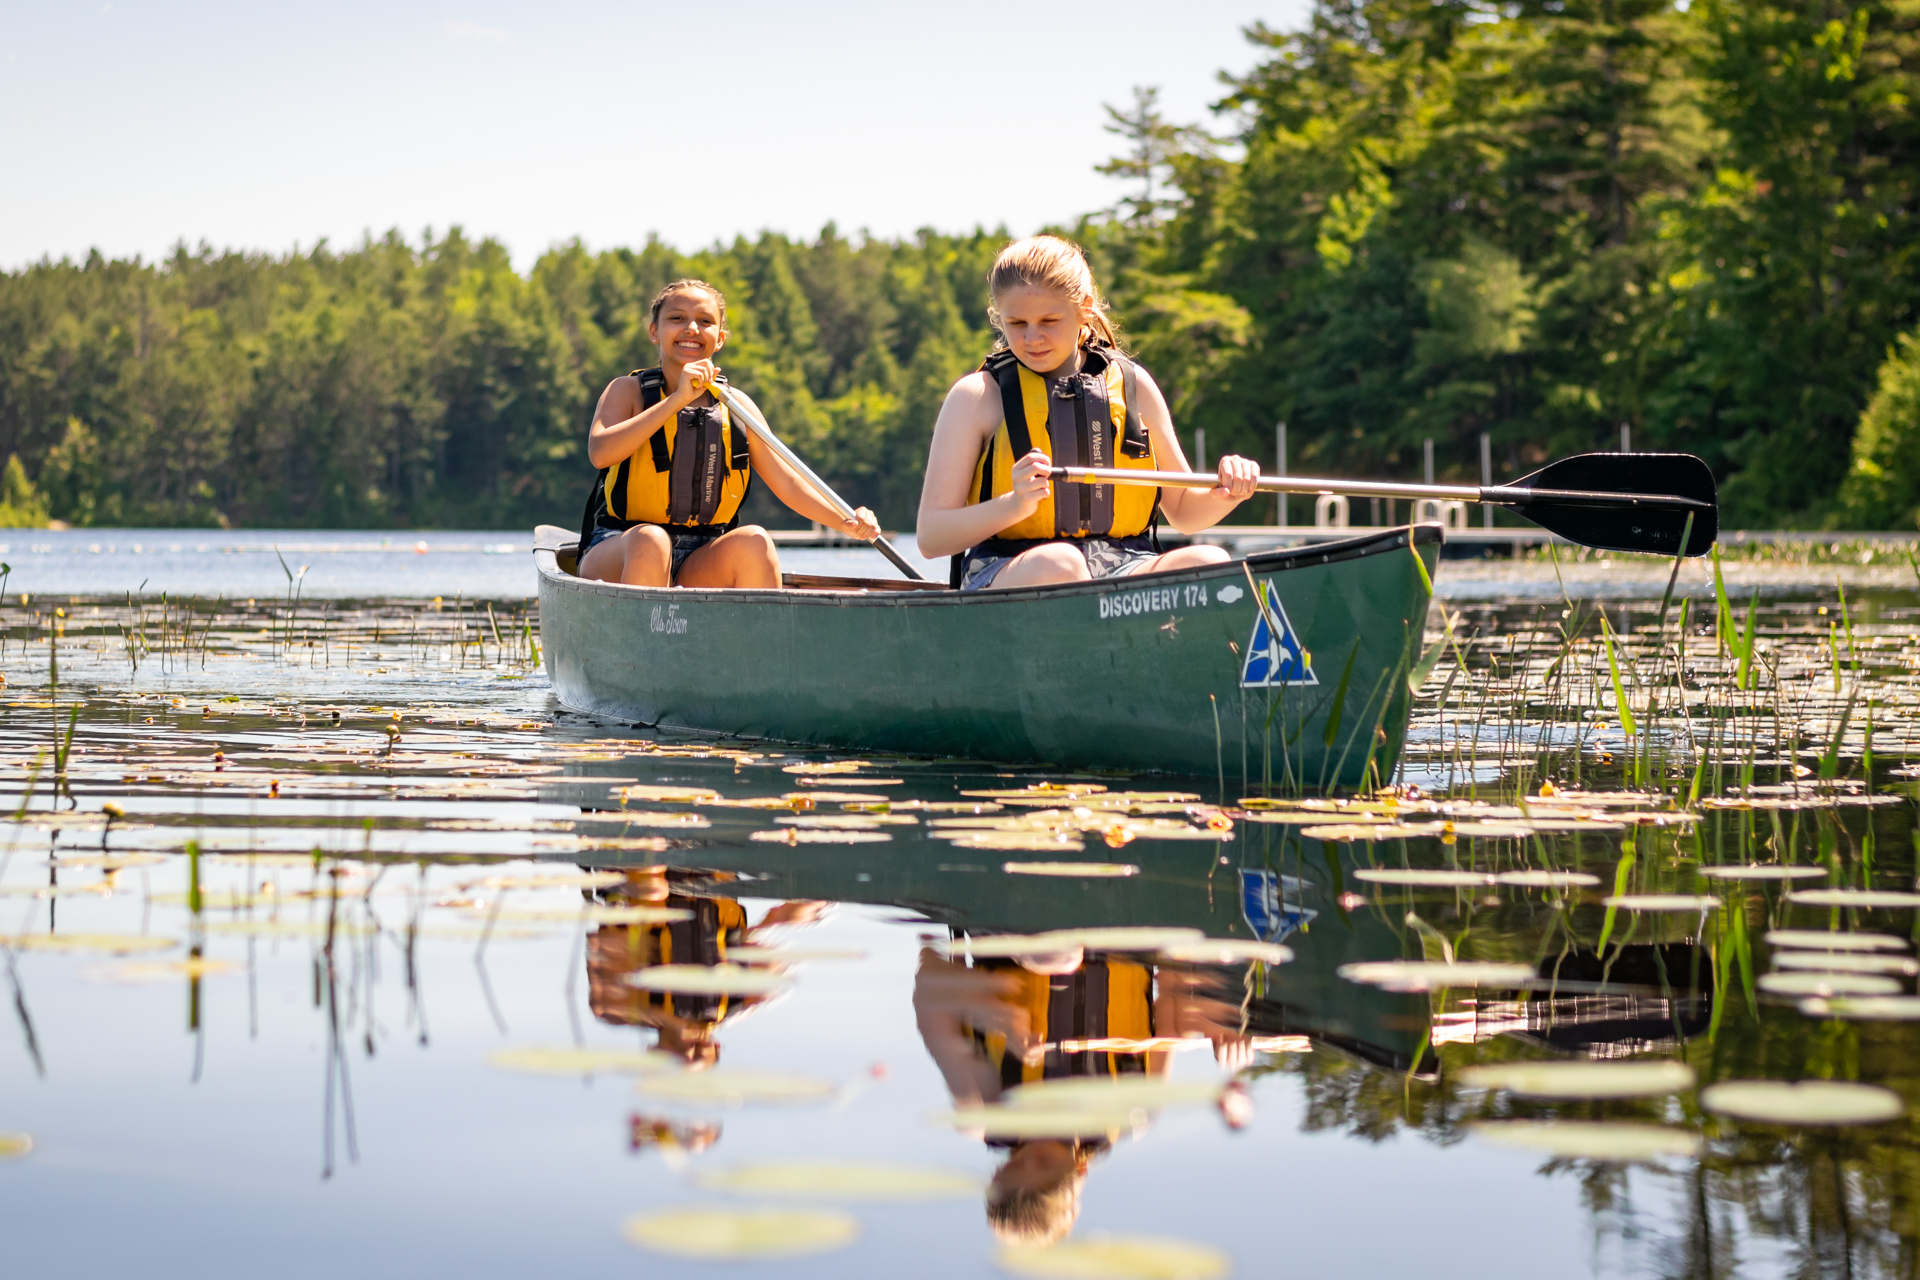 Two campers wearing yellow life jackets and paddling through lily pads in a green canoe with a Mass Audubon logo on the prow, their smiling faces reflected on the still water below